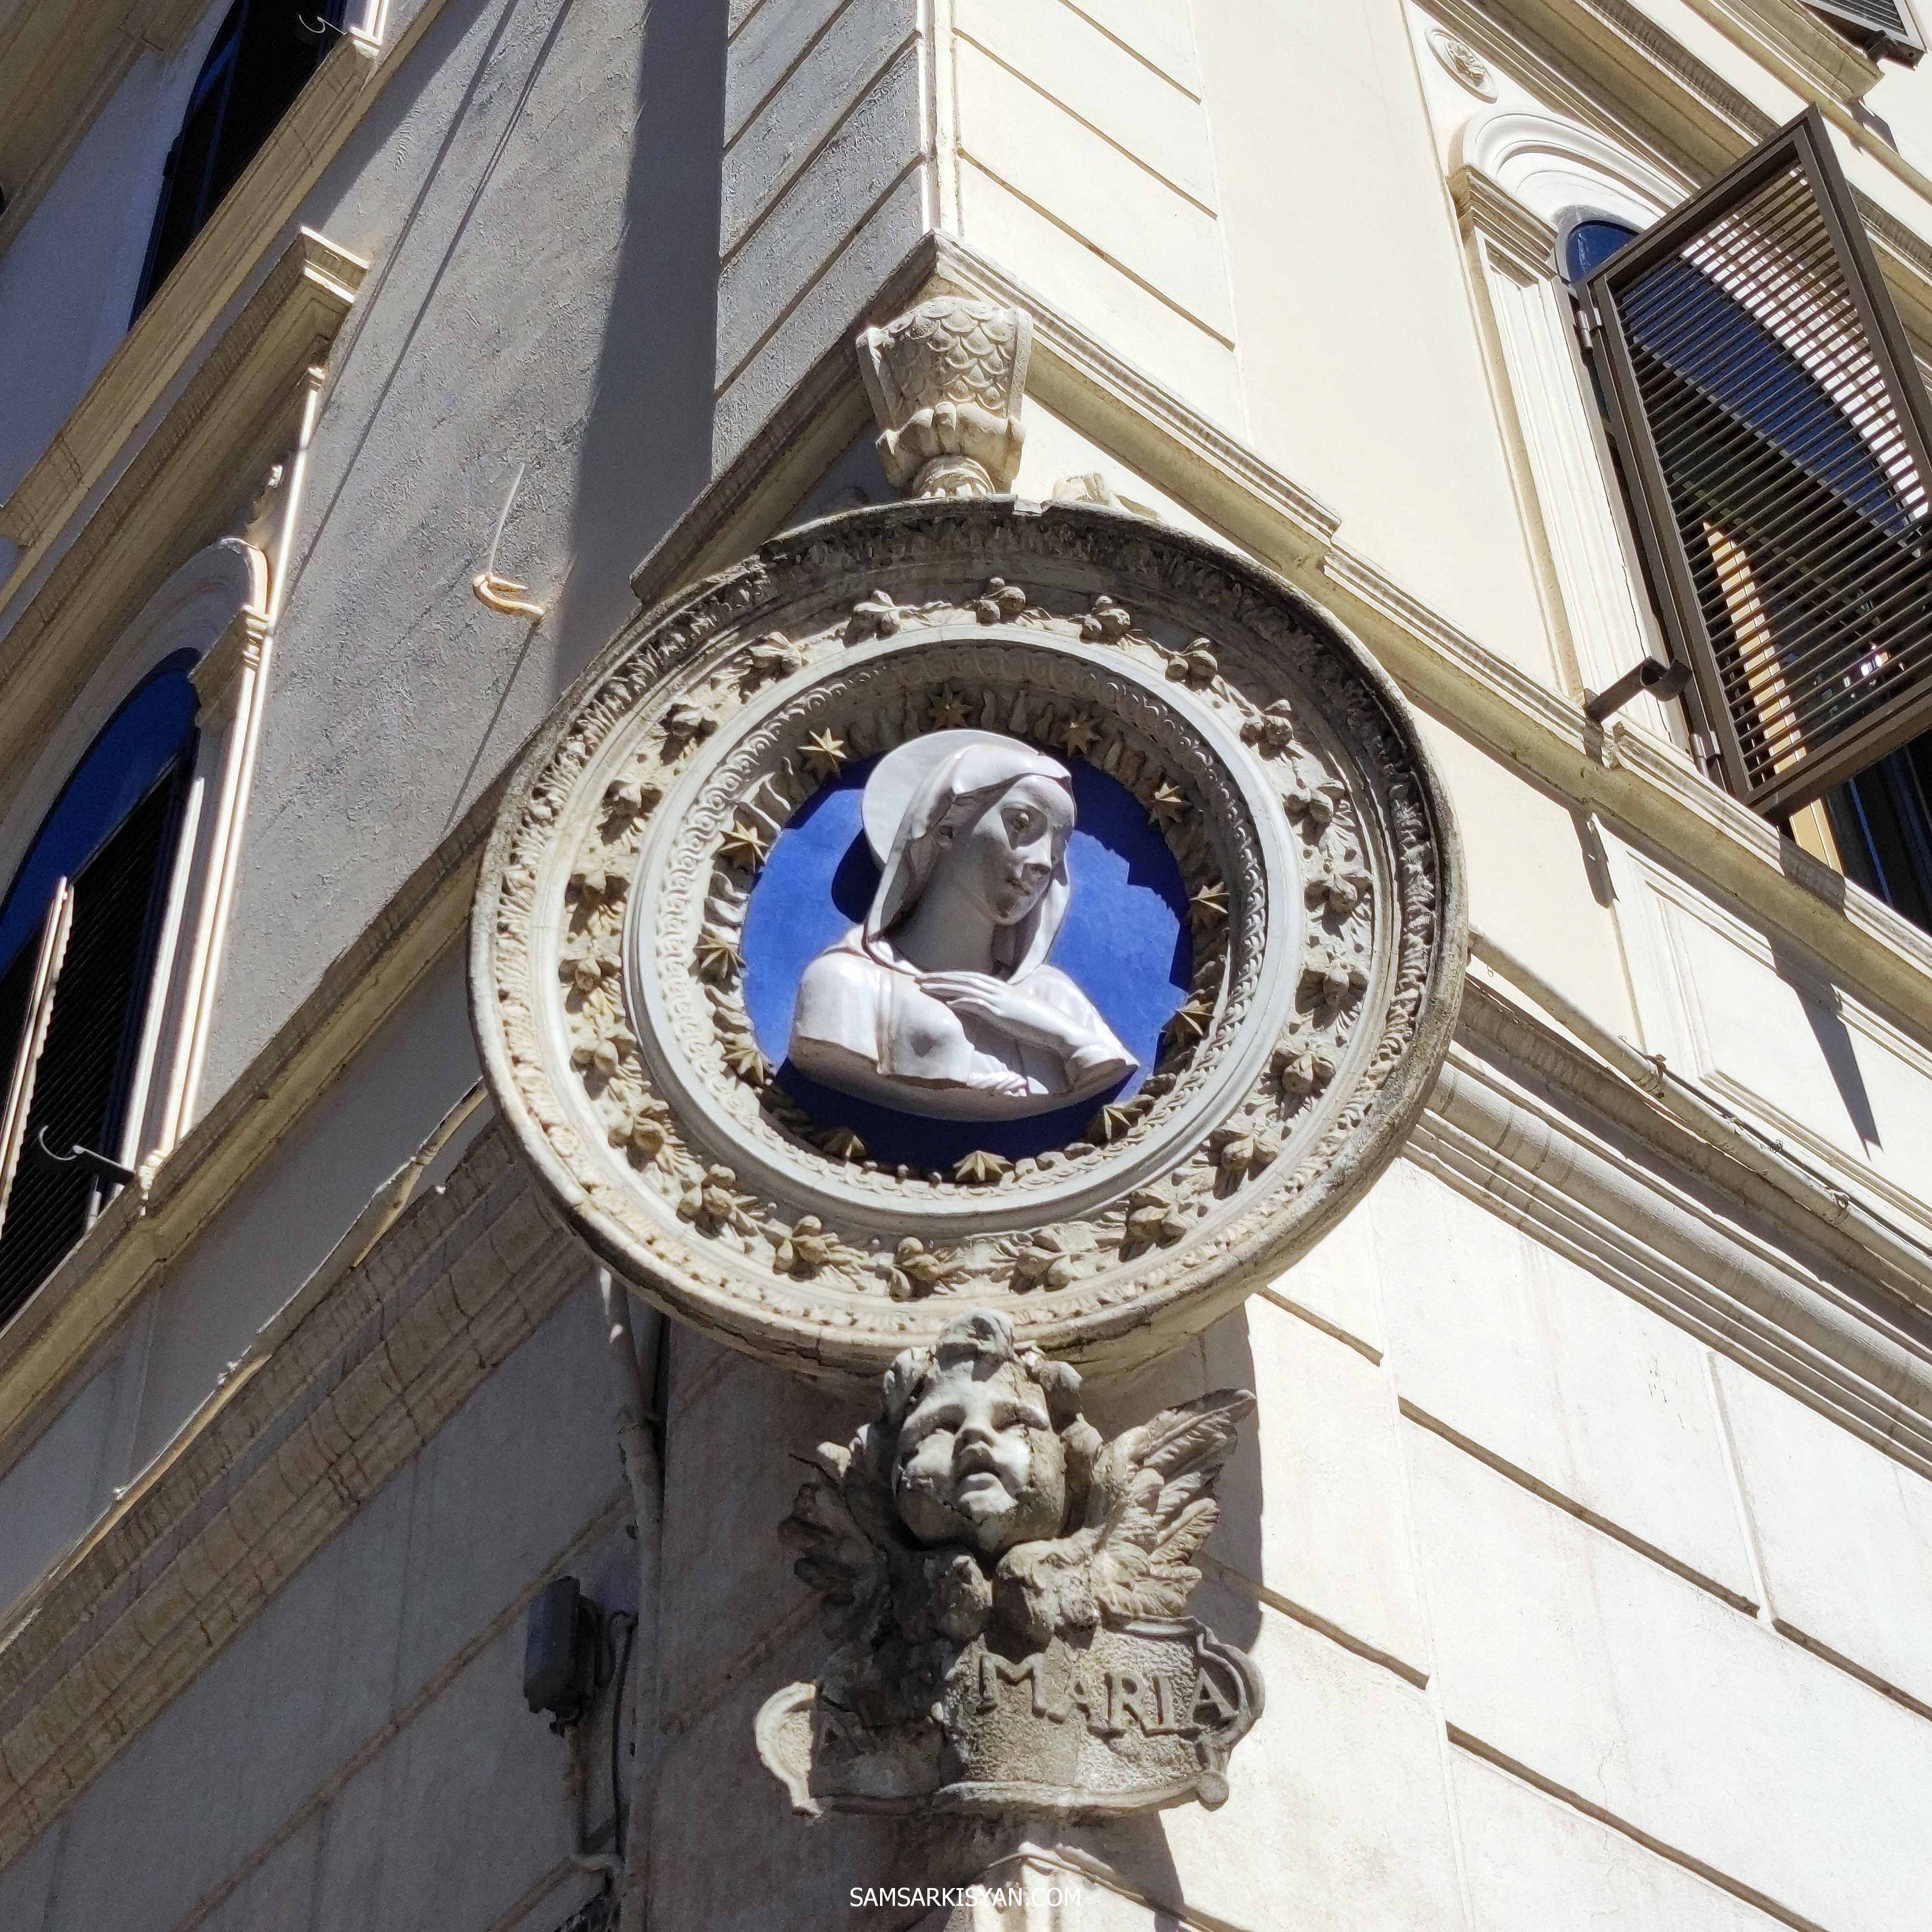 Decorations on the facades in Rome, architectural elements